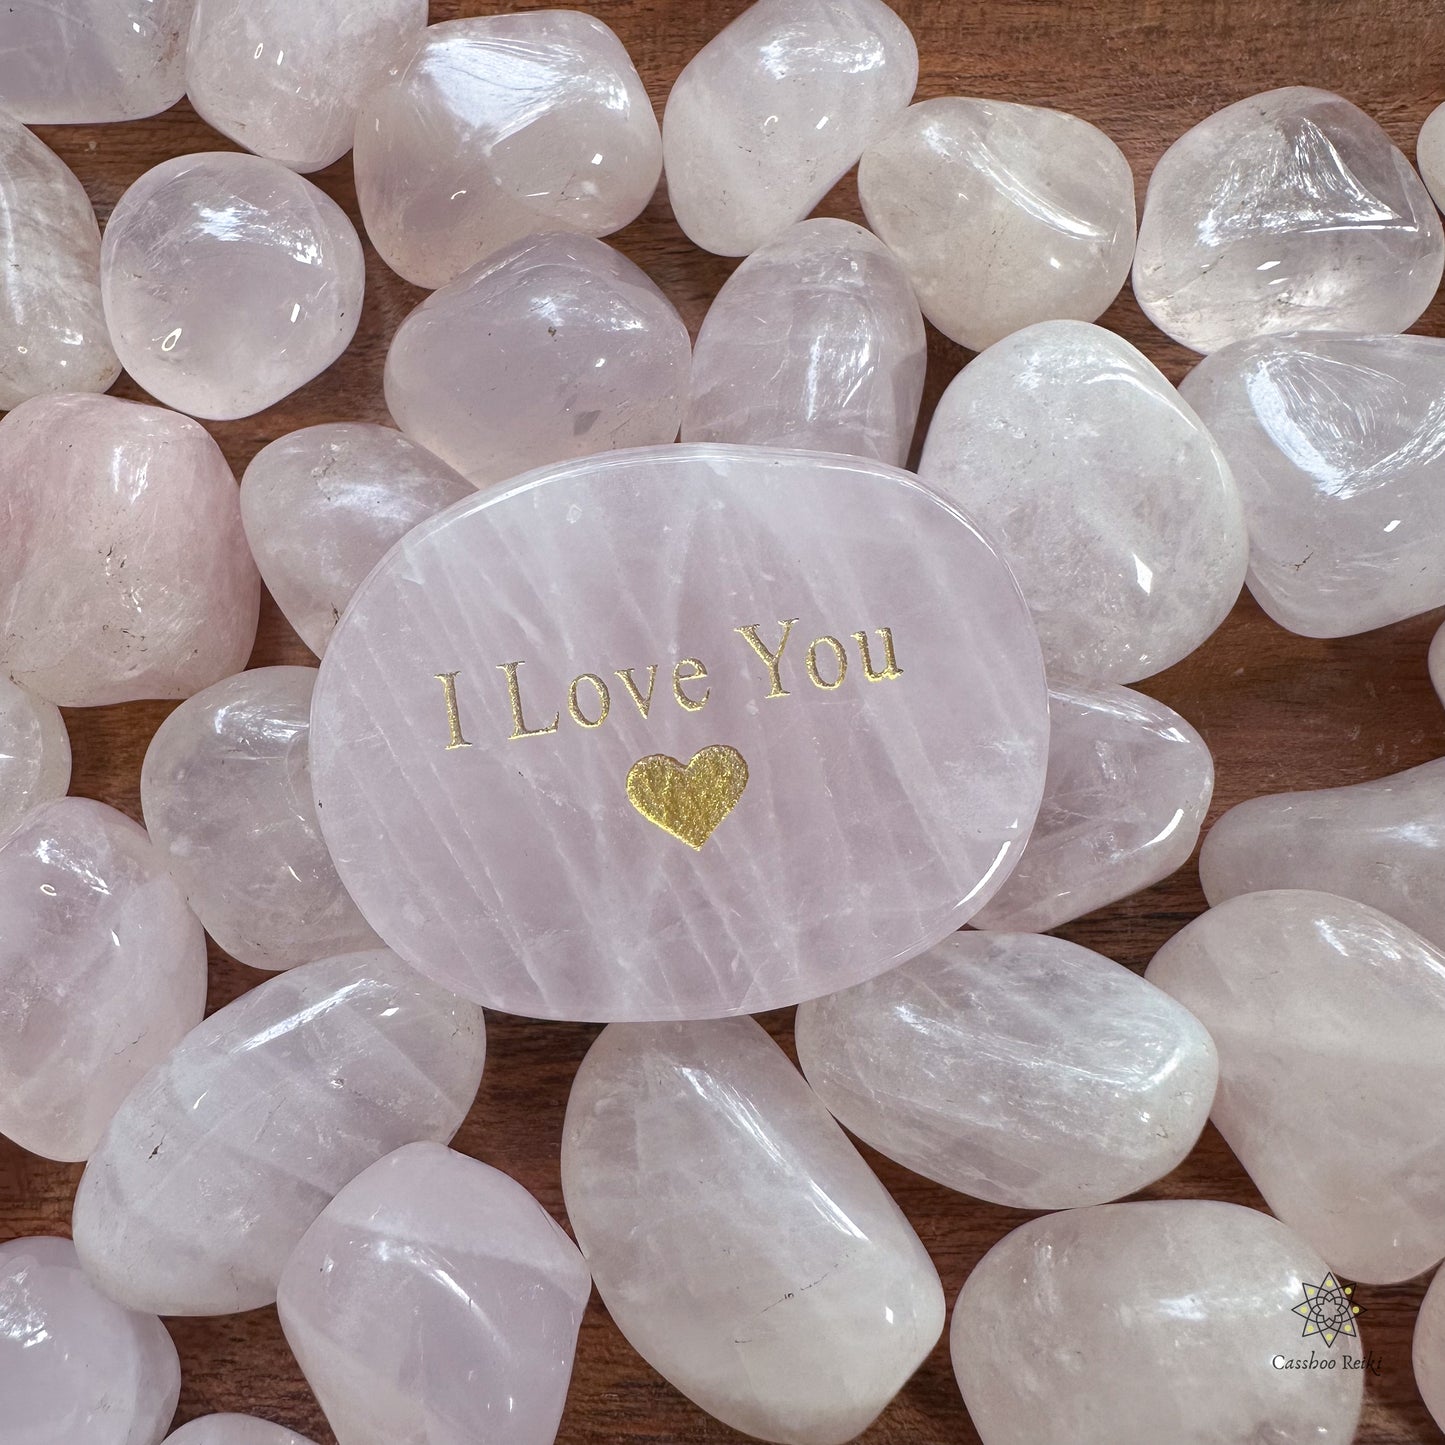 I Love You Palm Stone in Pink Quartz. Stone for Unconditional Love. Gifts for mom